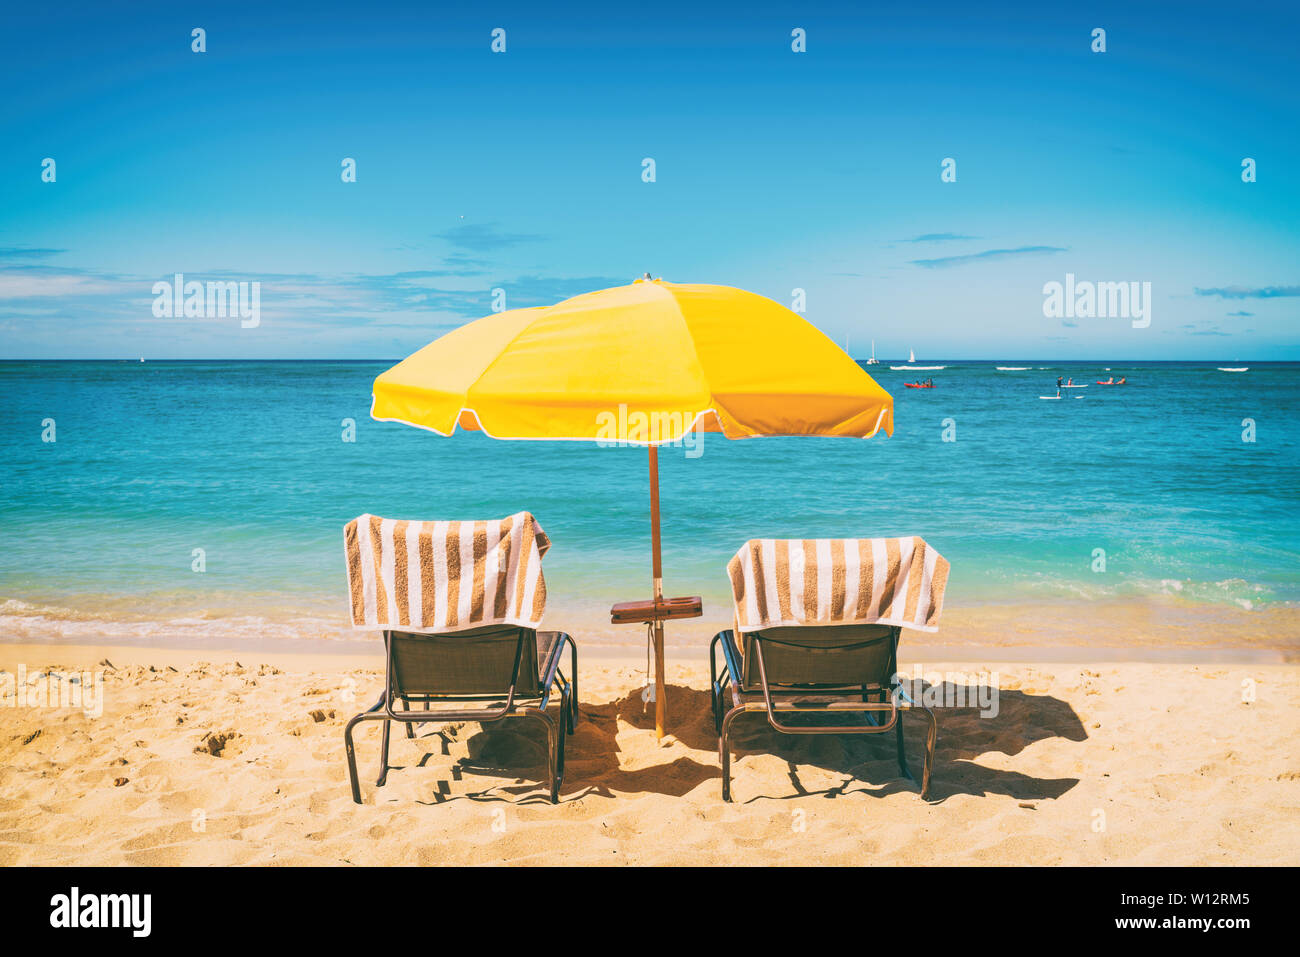 Beach holiday lounging chairs under sun umbrella vacation background. Summer tropical travel destination. Stock Photo